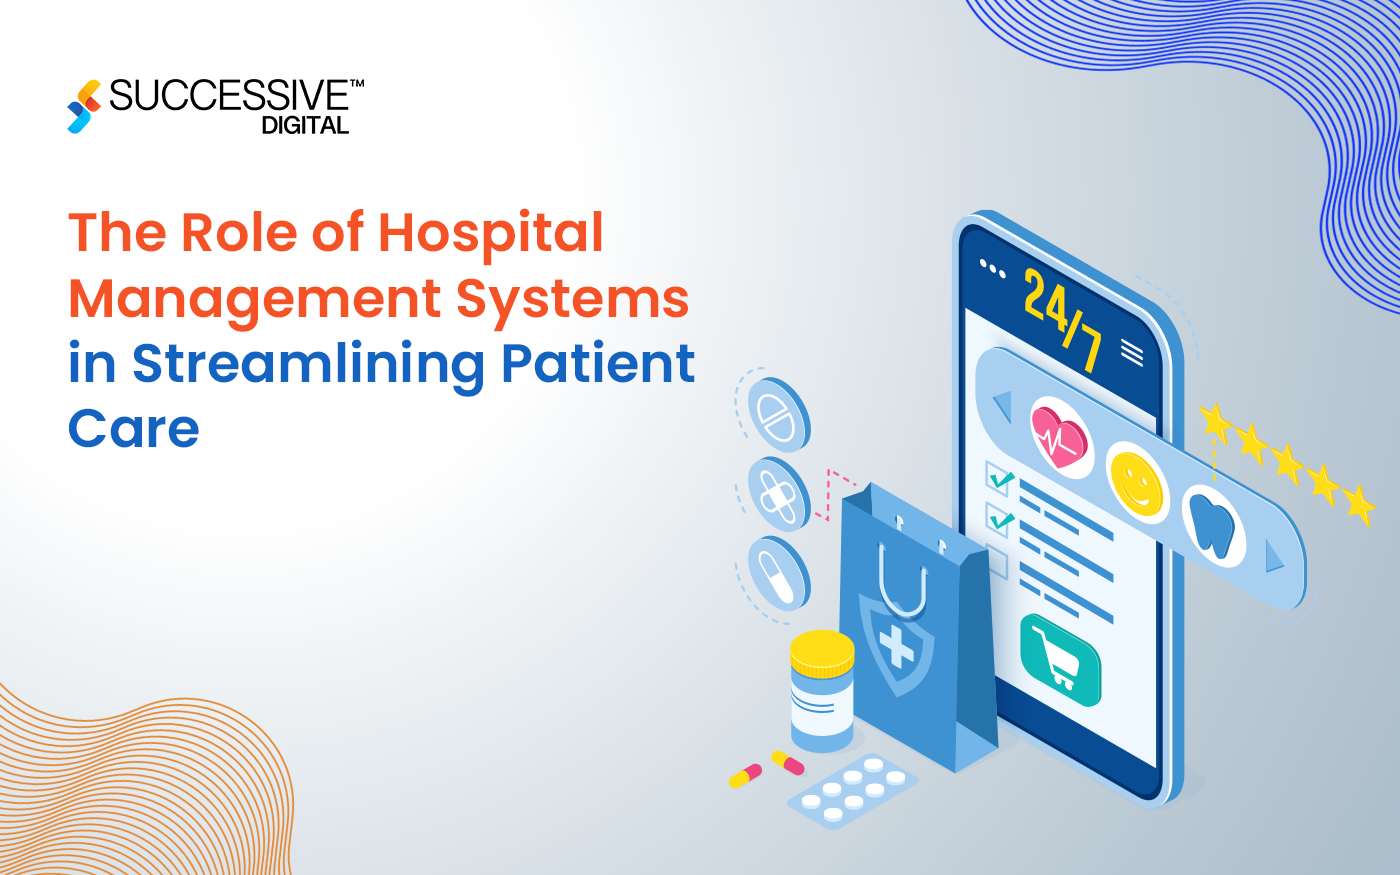 The Role of Hospital Management Systems in Streamlining Patient Care